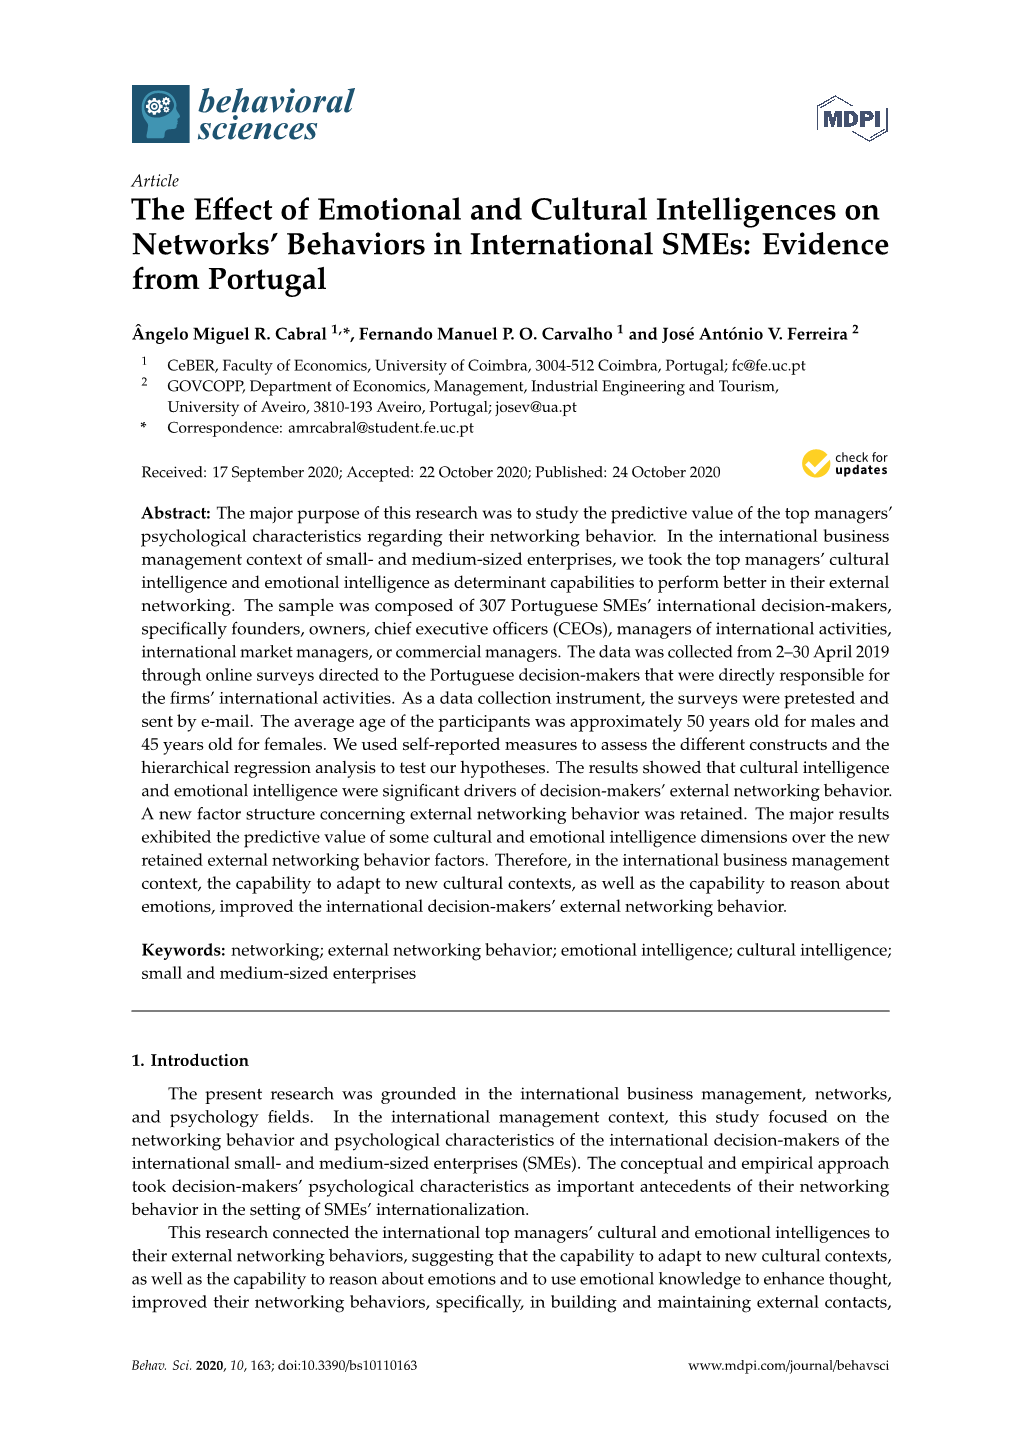 The Effect of Emotional and Cultural Intelligences on Networks' Behaviors in International Smes: Evidence from Portugal